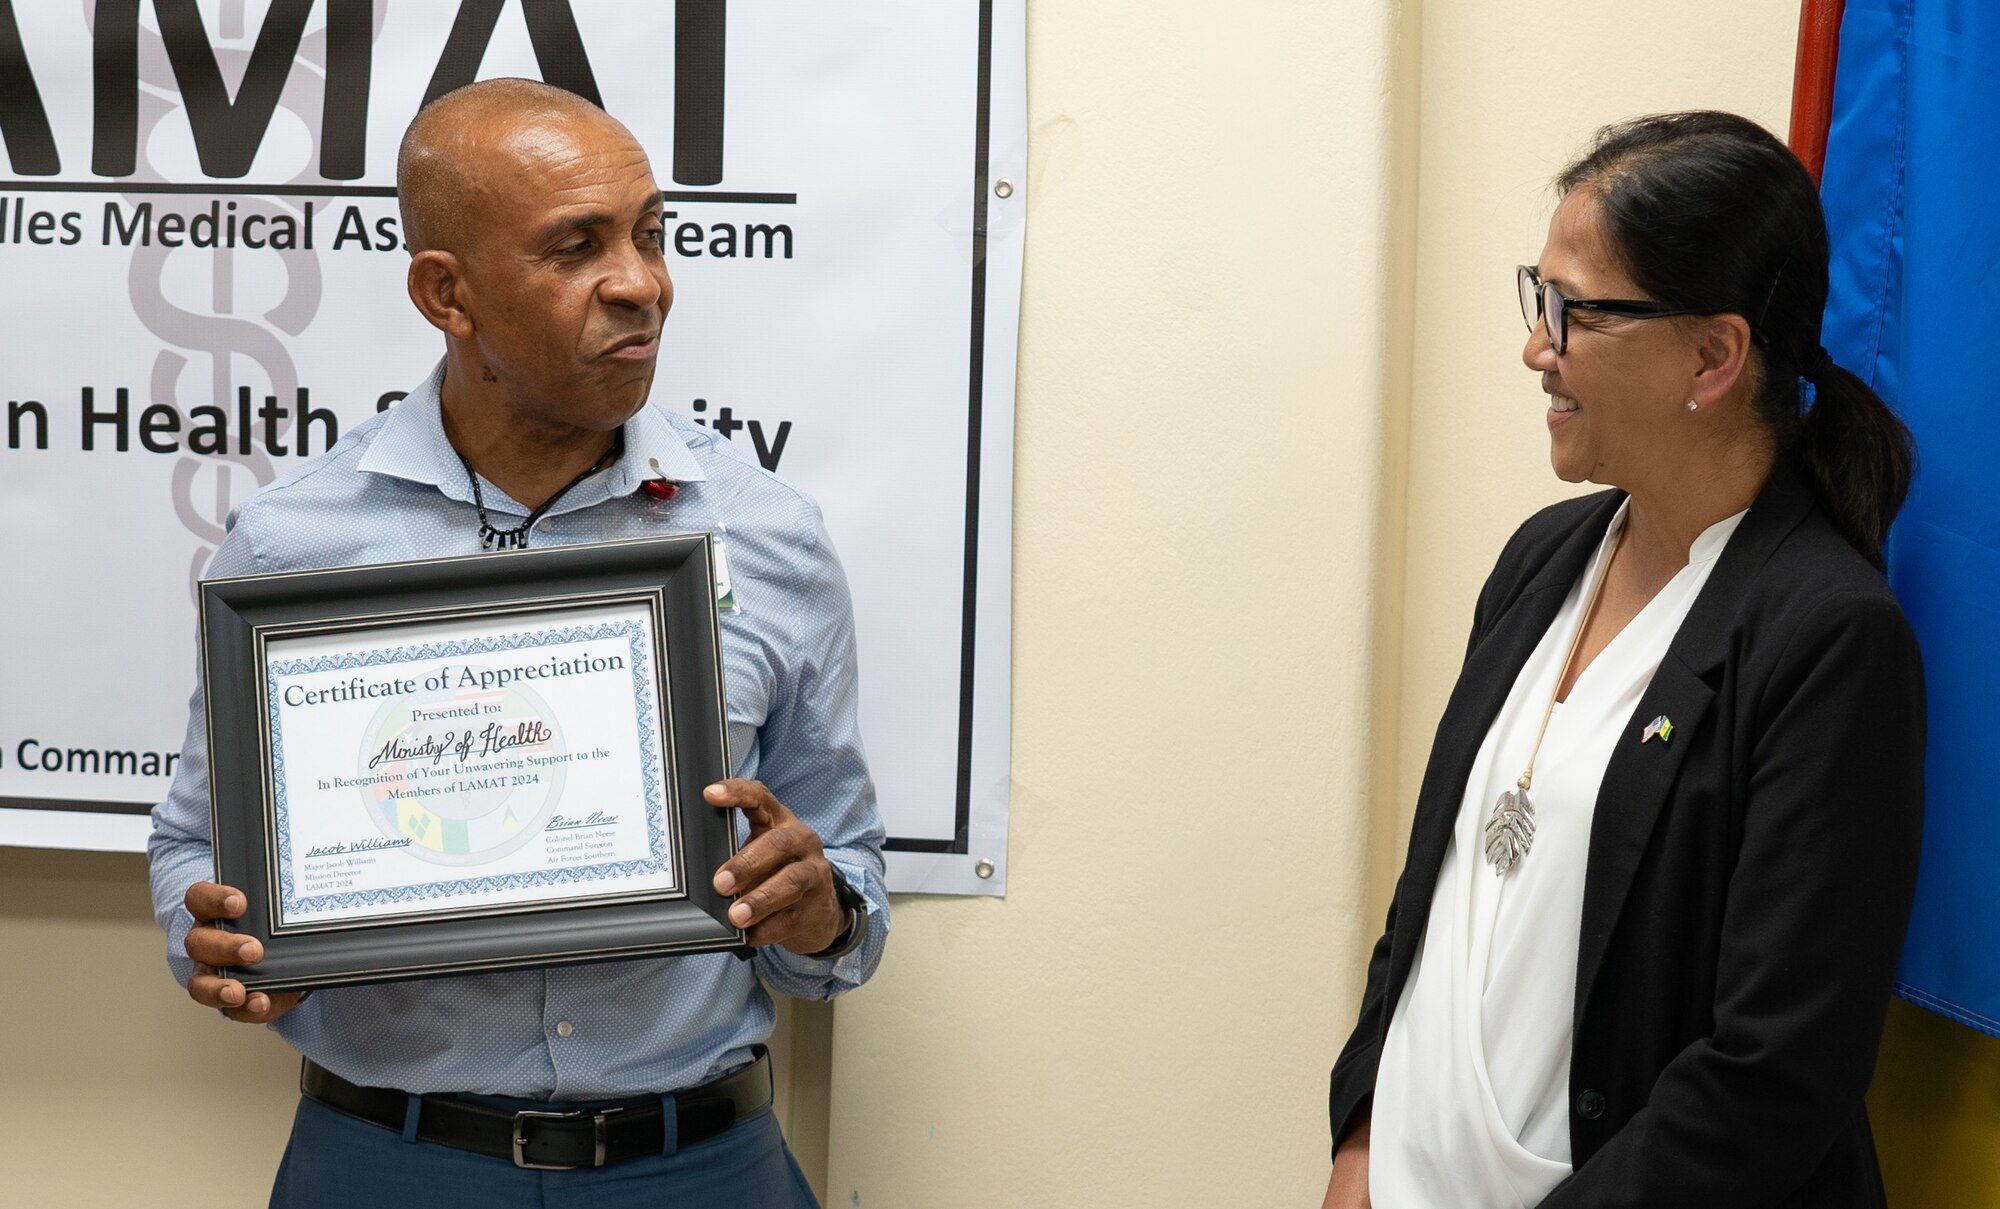 Cuthbert Knights, permanent secretary, Ministry of Health Wellness and the Environment, accepts a certificate of appreciation at the Financial Complex, Kingstown, during the Lesser Antilles Medical Assistance Team mission in St. Vincent and the Grenadines, March 4, 2024. Thirty-four active duty and reserve Airmen participated in this year’s LAMAT mission to St. Vincent and the Grenadines, assisting in health engagements, exchanging best practices and developing stronger relationships with host nation partners. (U.S. Air Force photo by Capt. Danny Rangel)